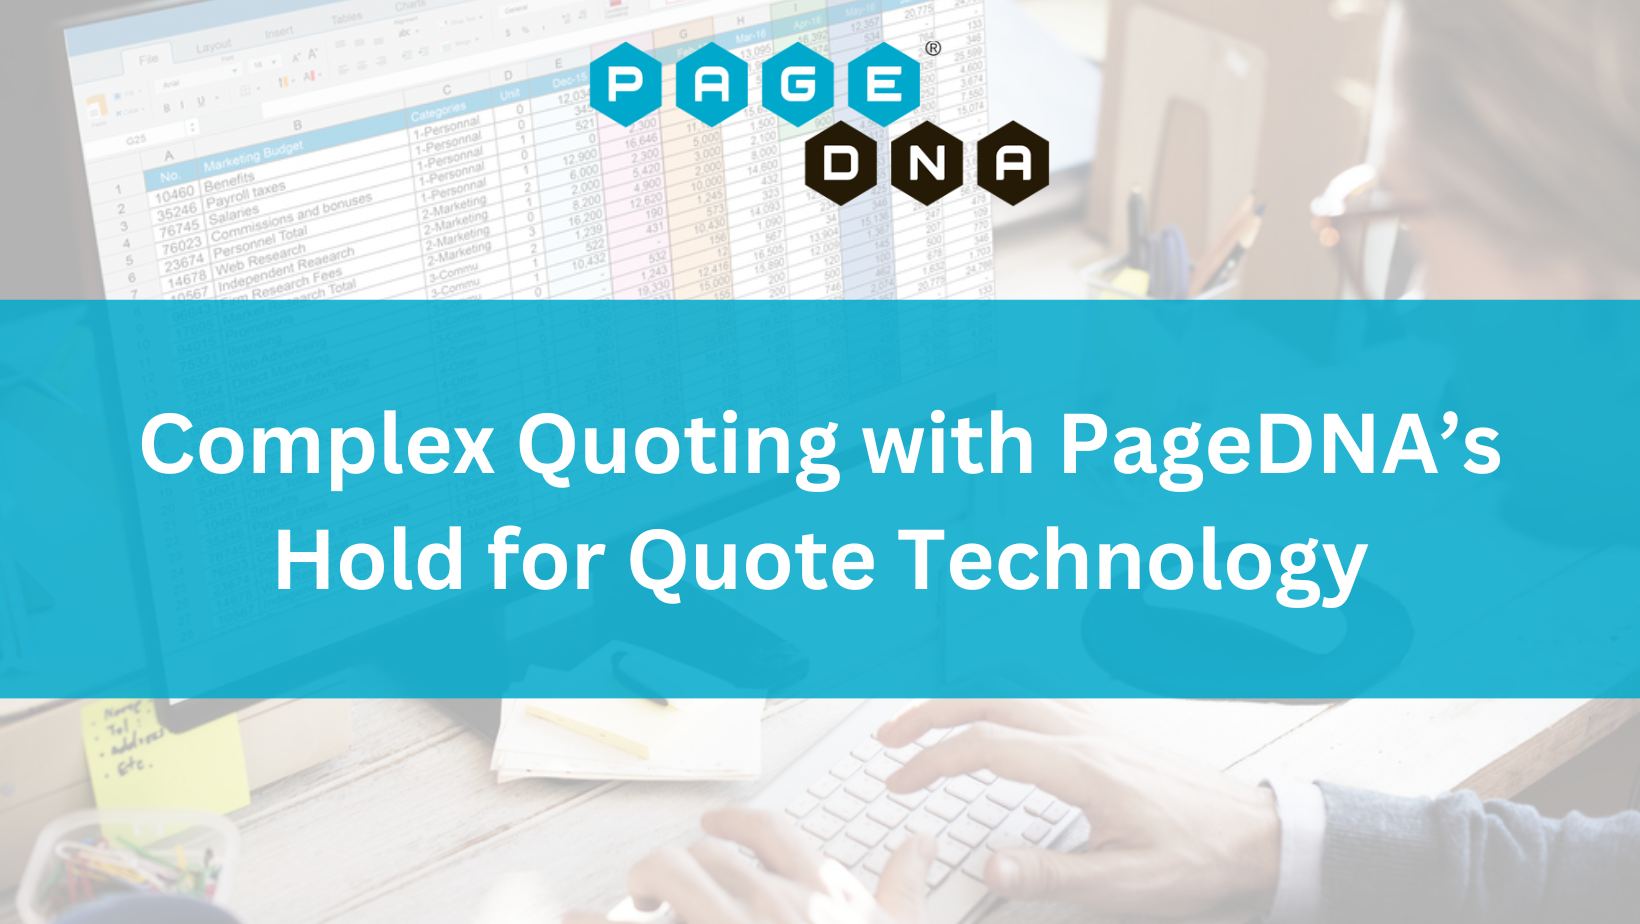 Complex Quoting with PageDNA’s Hold for Quote Technology